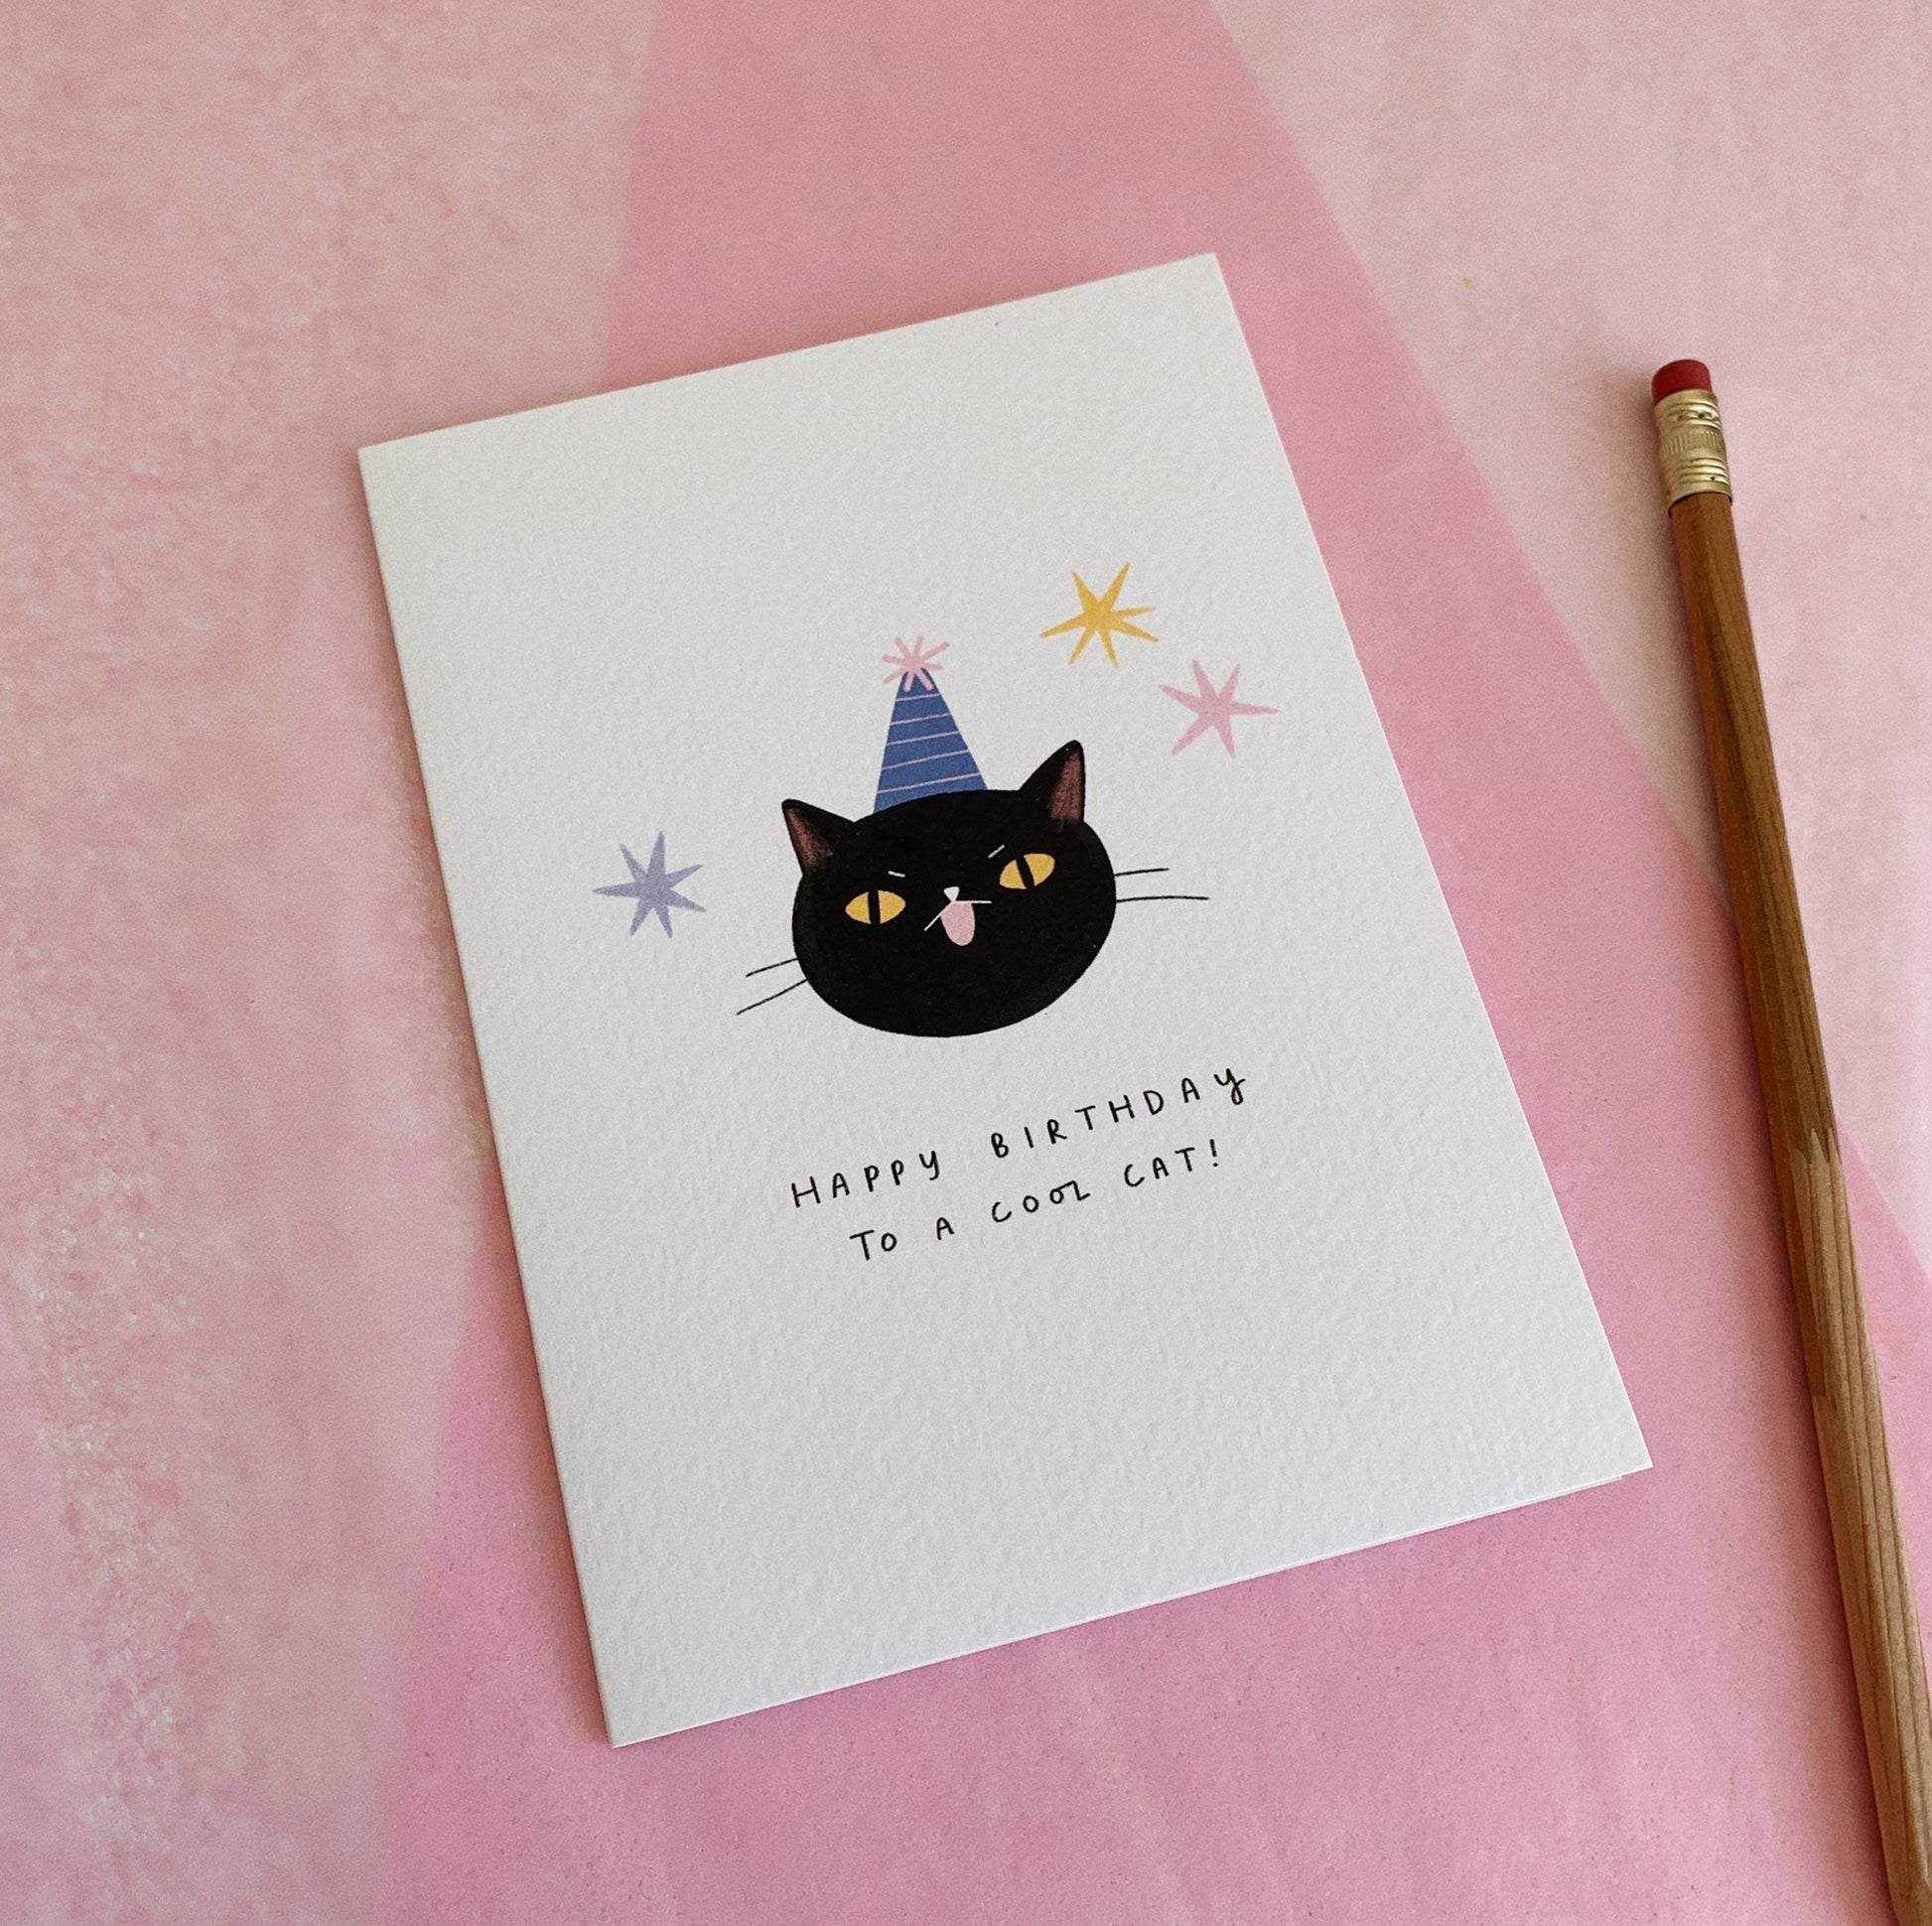 An A6 illustrated card featuring a black cat wearing a blue and pink striped party hat, with the text “Happy Birthday To A Cool Cat” underneath. Stars decorate around the cat face. The card lies on top of pink tissue paper and a pencil has been placed next to the card.